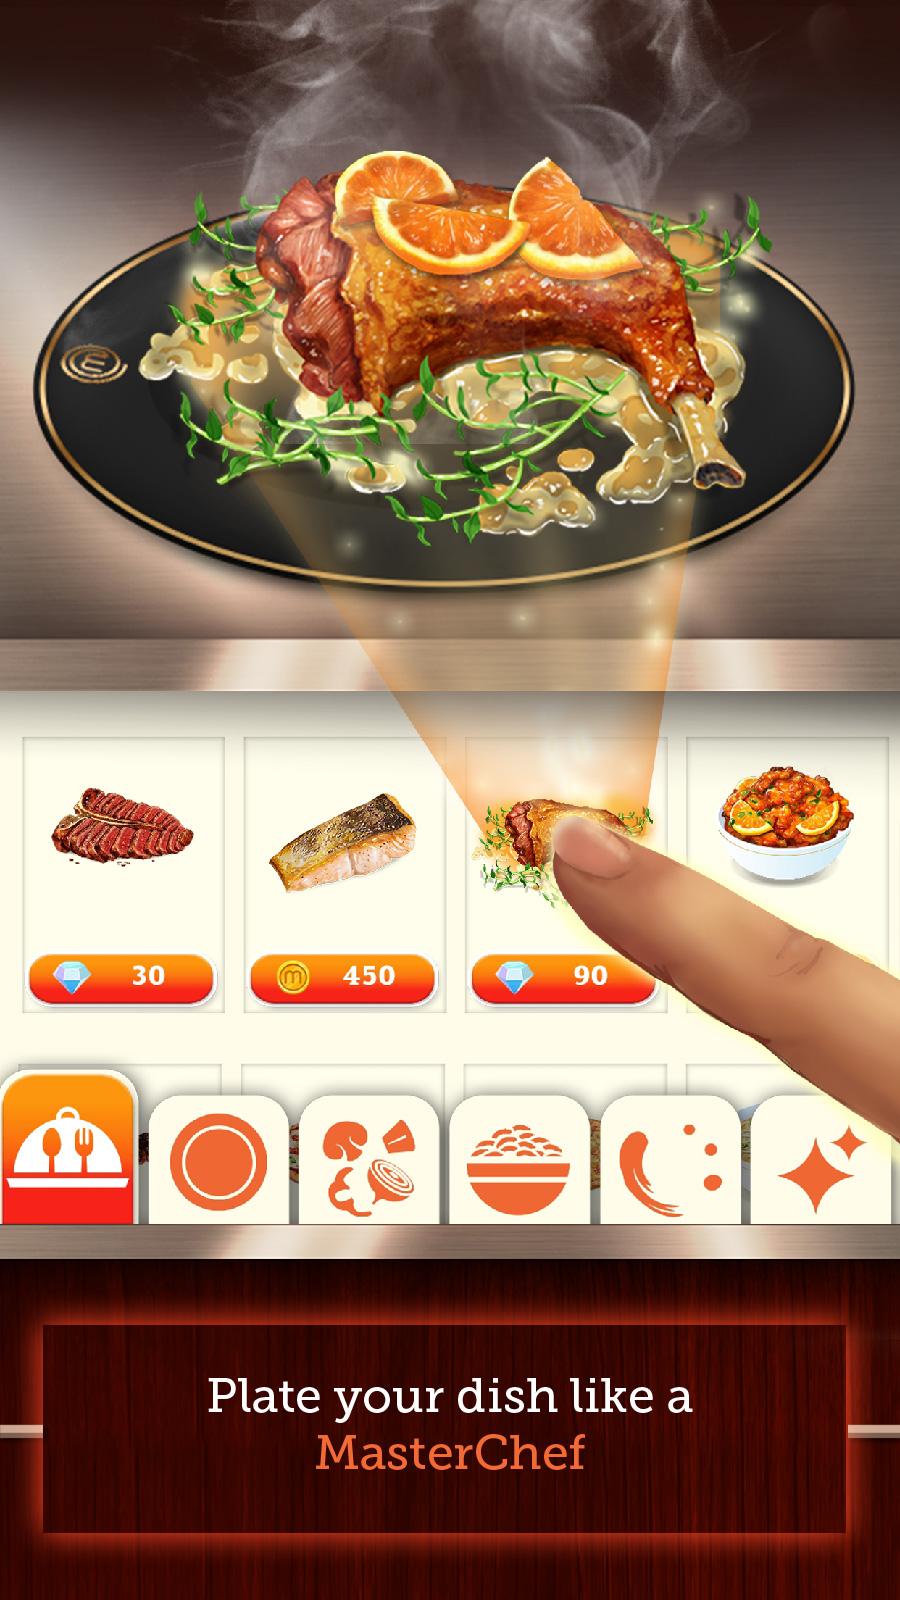 MasterChef: Dream Plate (Food Plating Design Game) for Android